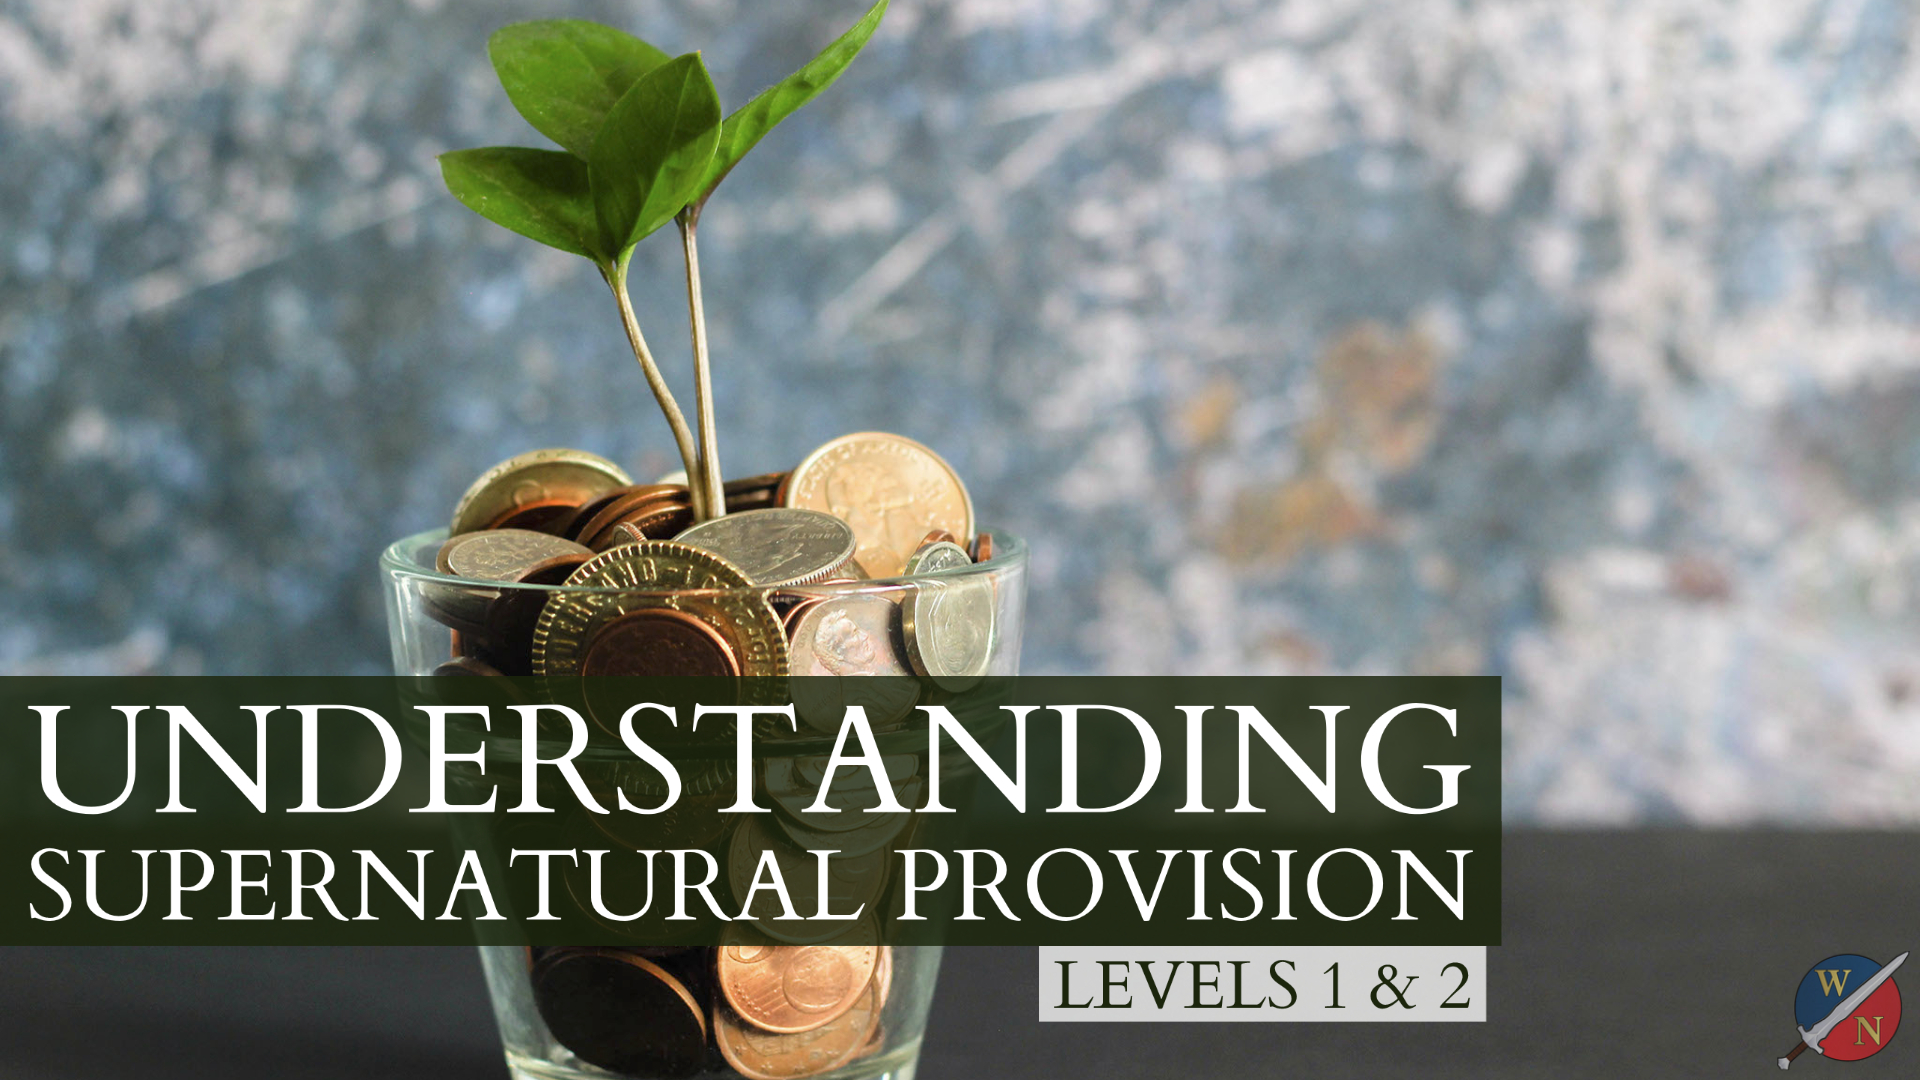 Understanding Supernatural Provision with Dr. Kevin Zadai - course bundle image